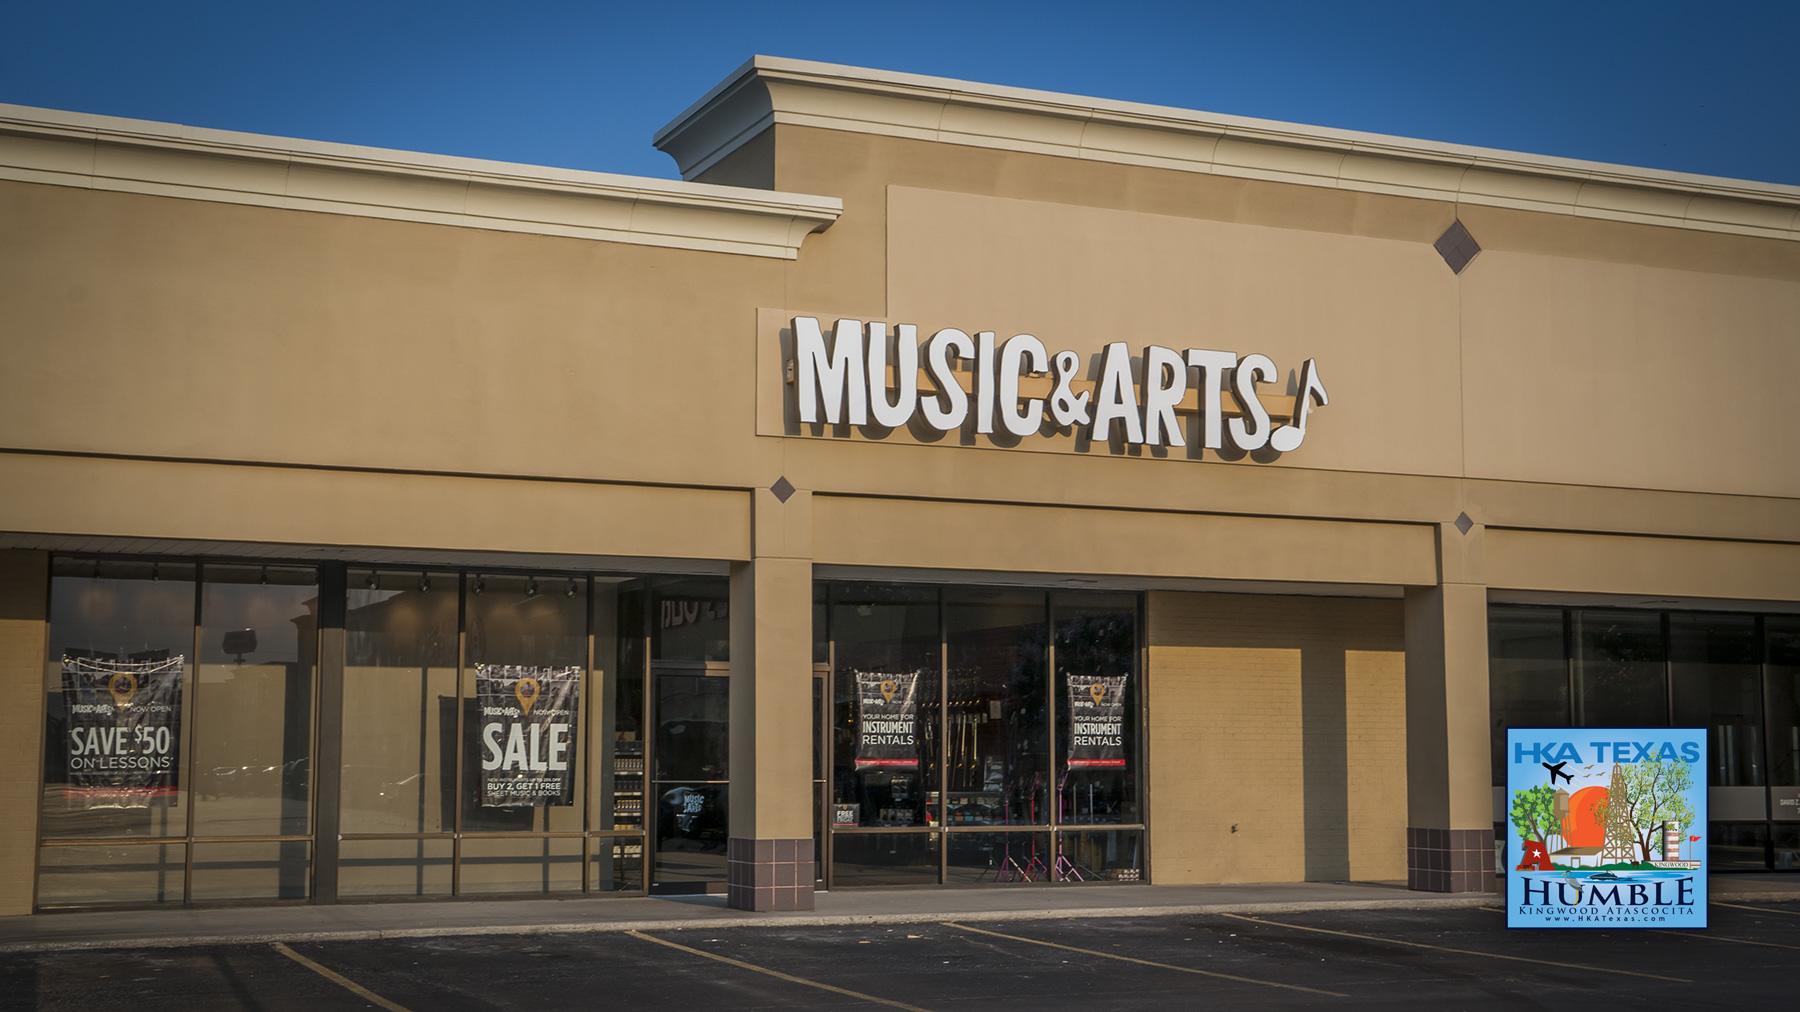 Music & Arts, a national music store owned by the Guitar Center opens